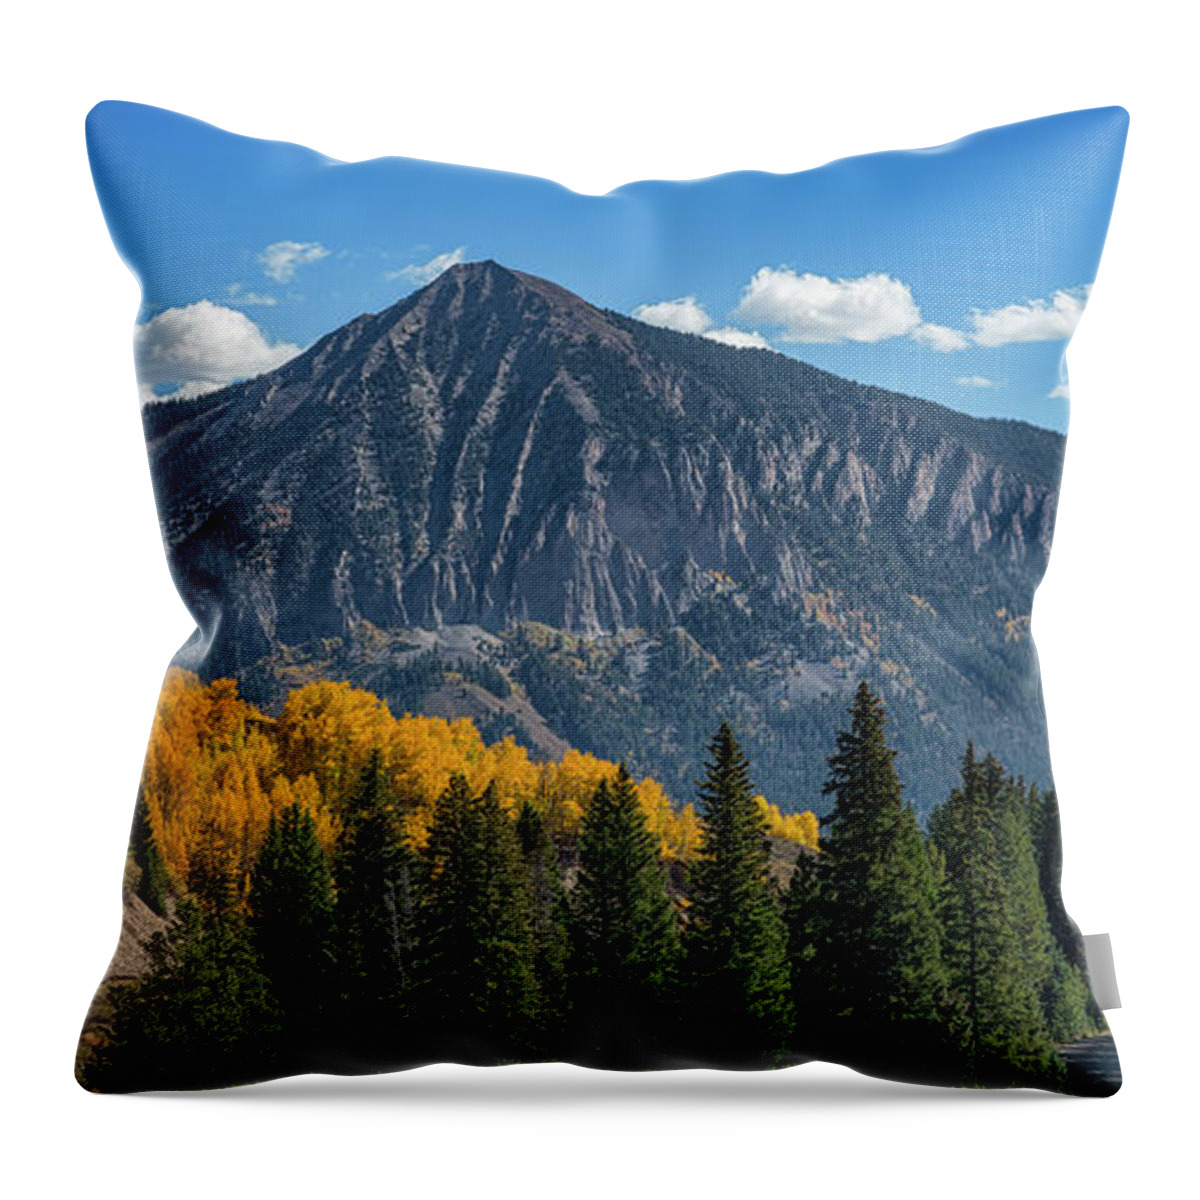 Crested Butte Throw Pillow featuring the photograph Crested Butte Mountain by Michael Ver Sprill